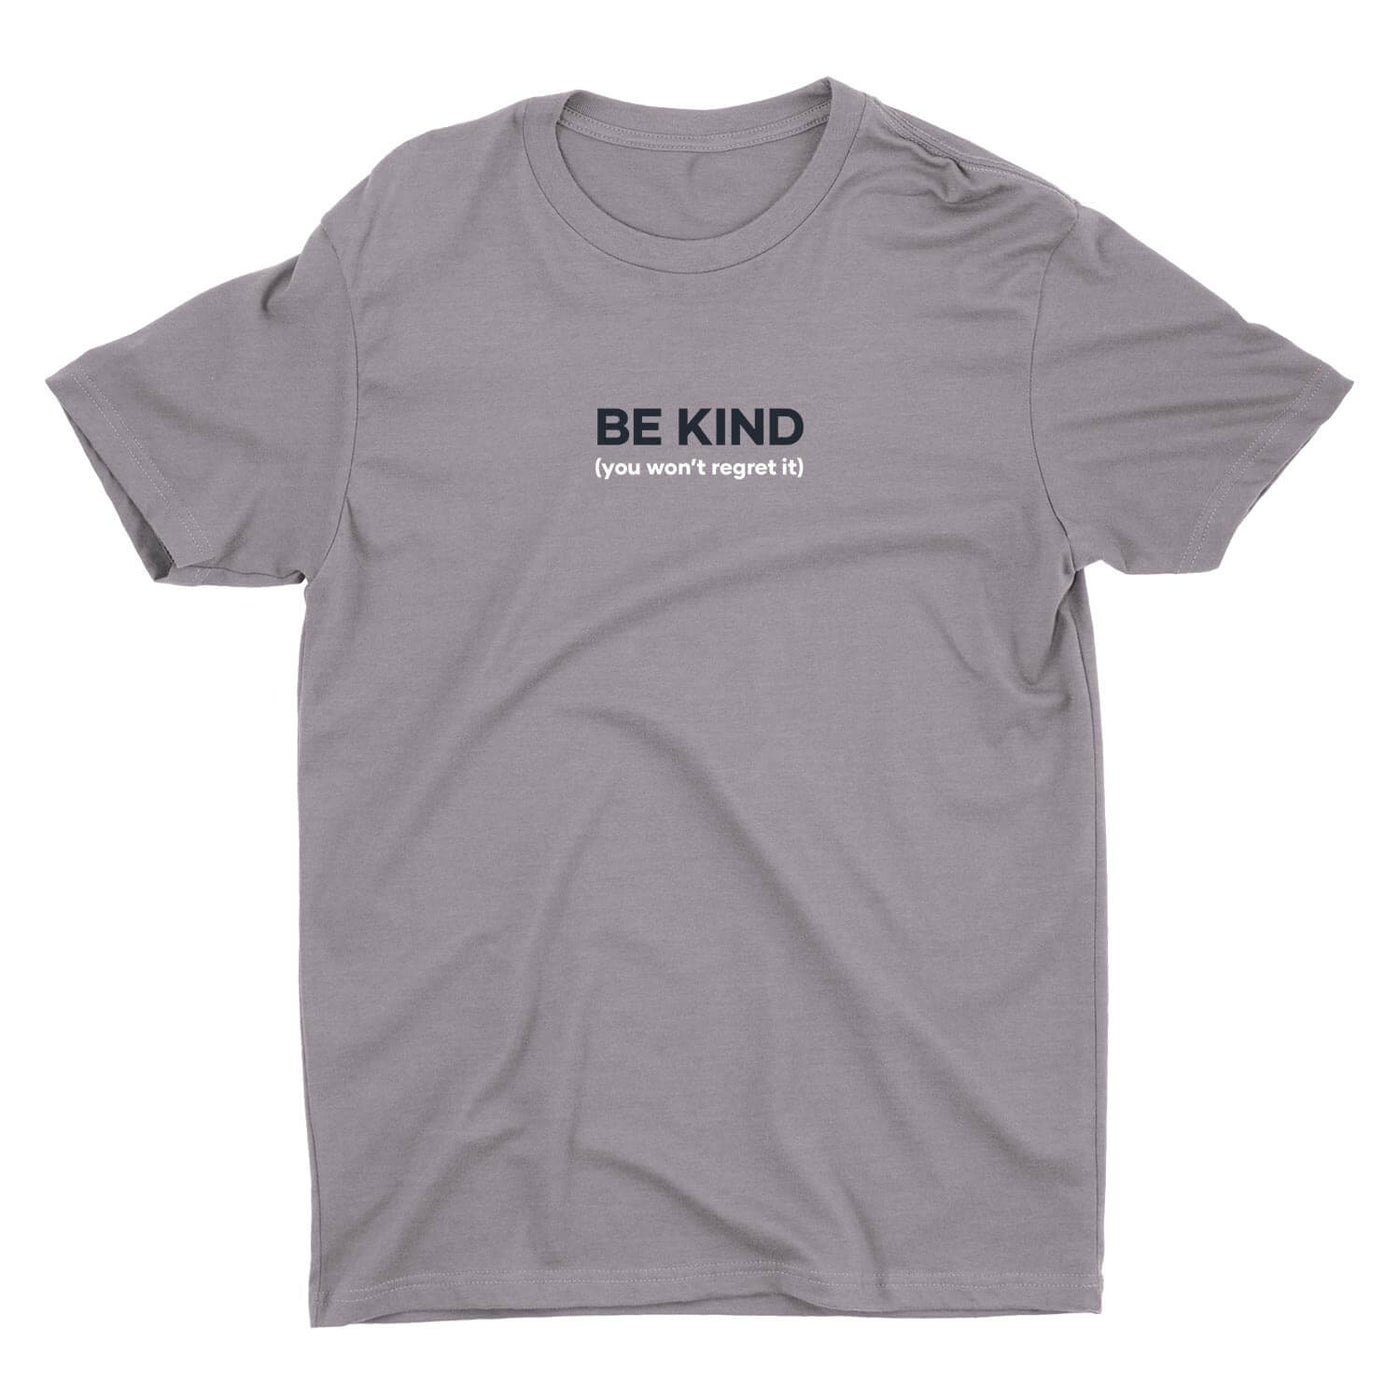 Be Kind Tee - Only Human